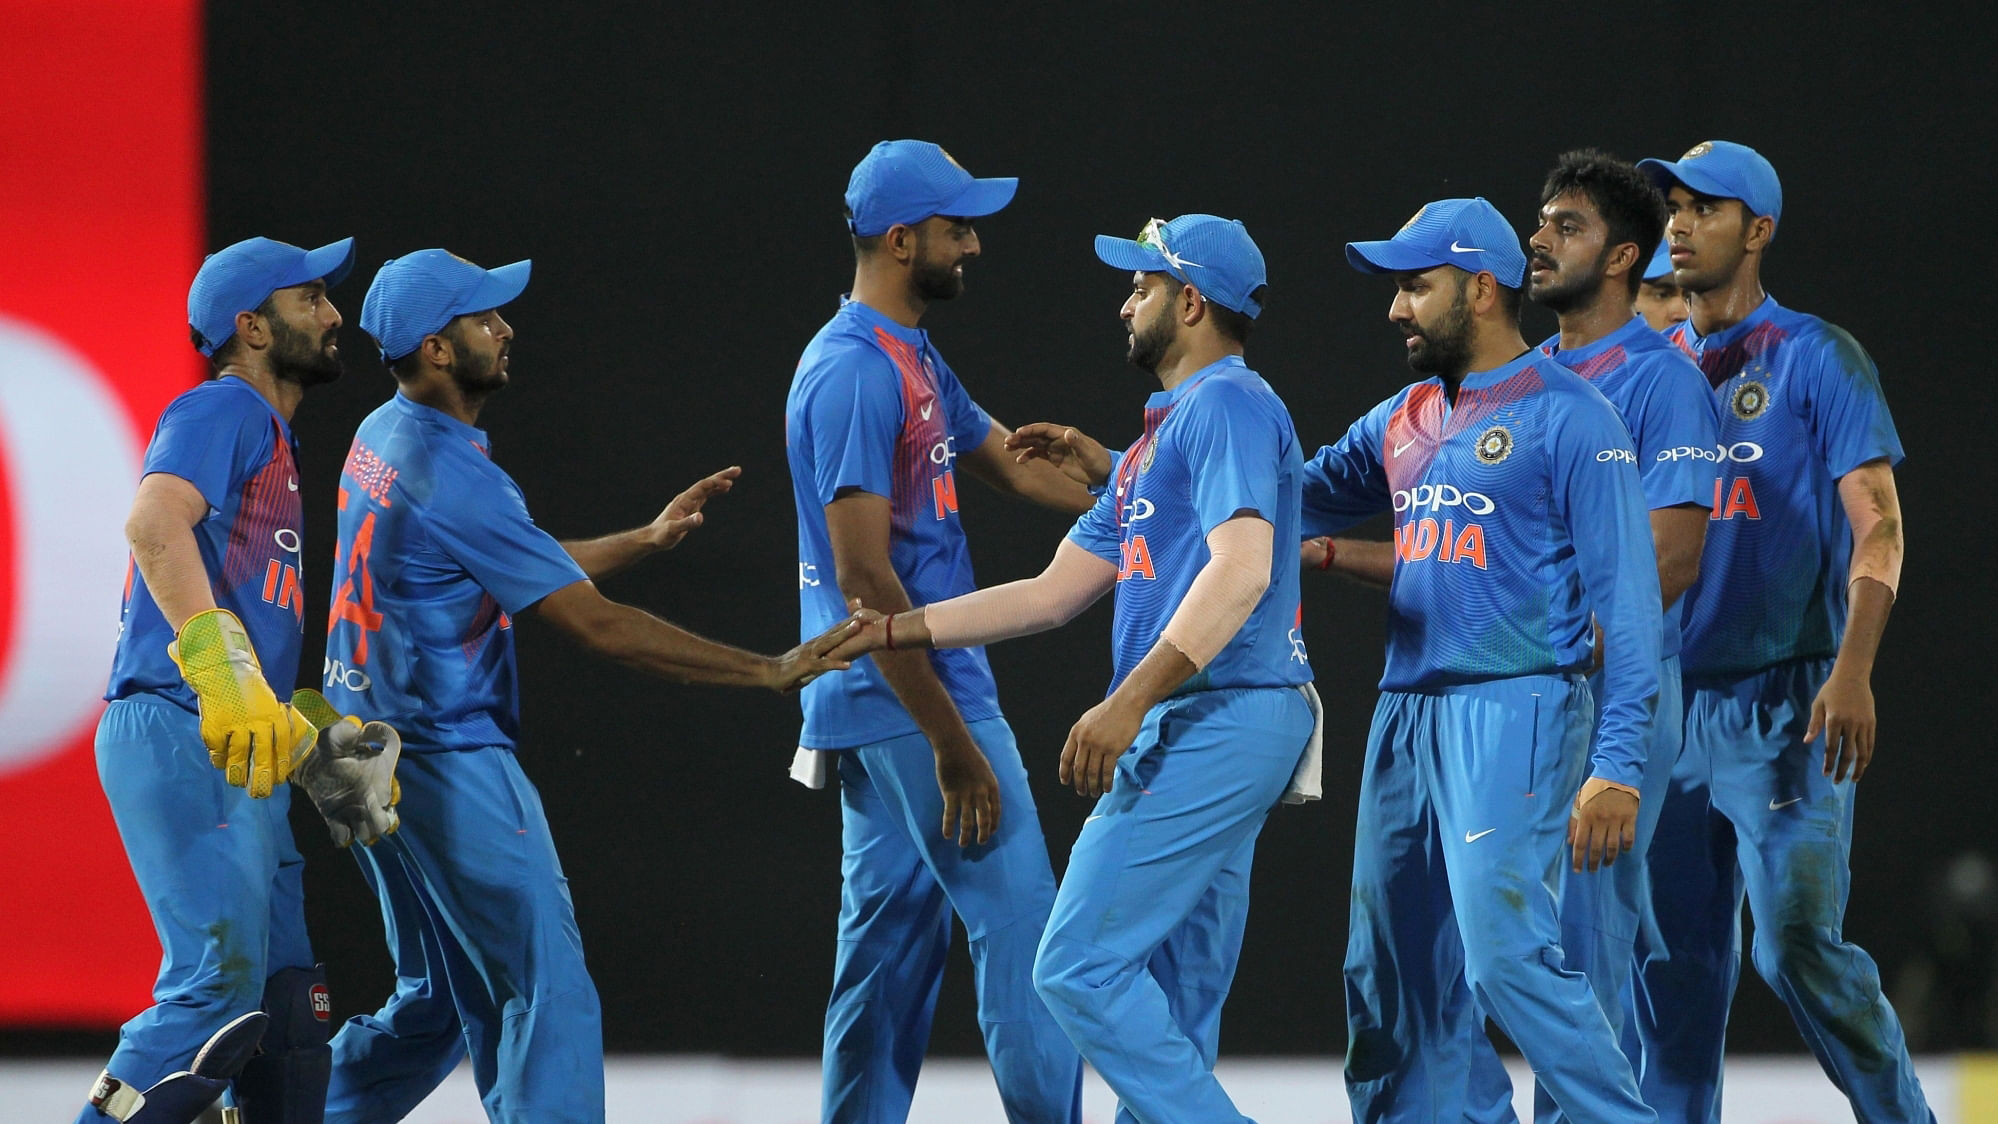 India celebrate a wicket during their 2nd match of 2018 Nidahas Twenty20 Tri-Series between India and Bangladesh at R.Premadasa Stadium in Colombo